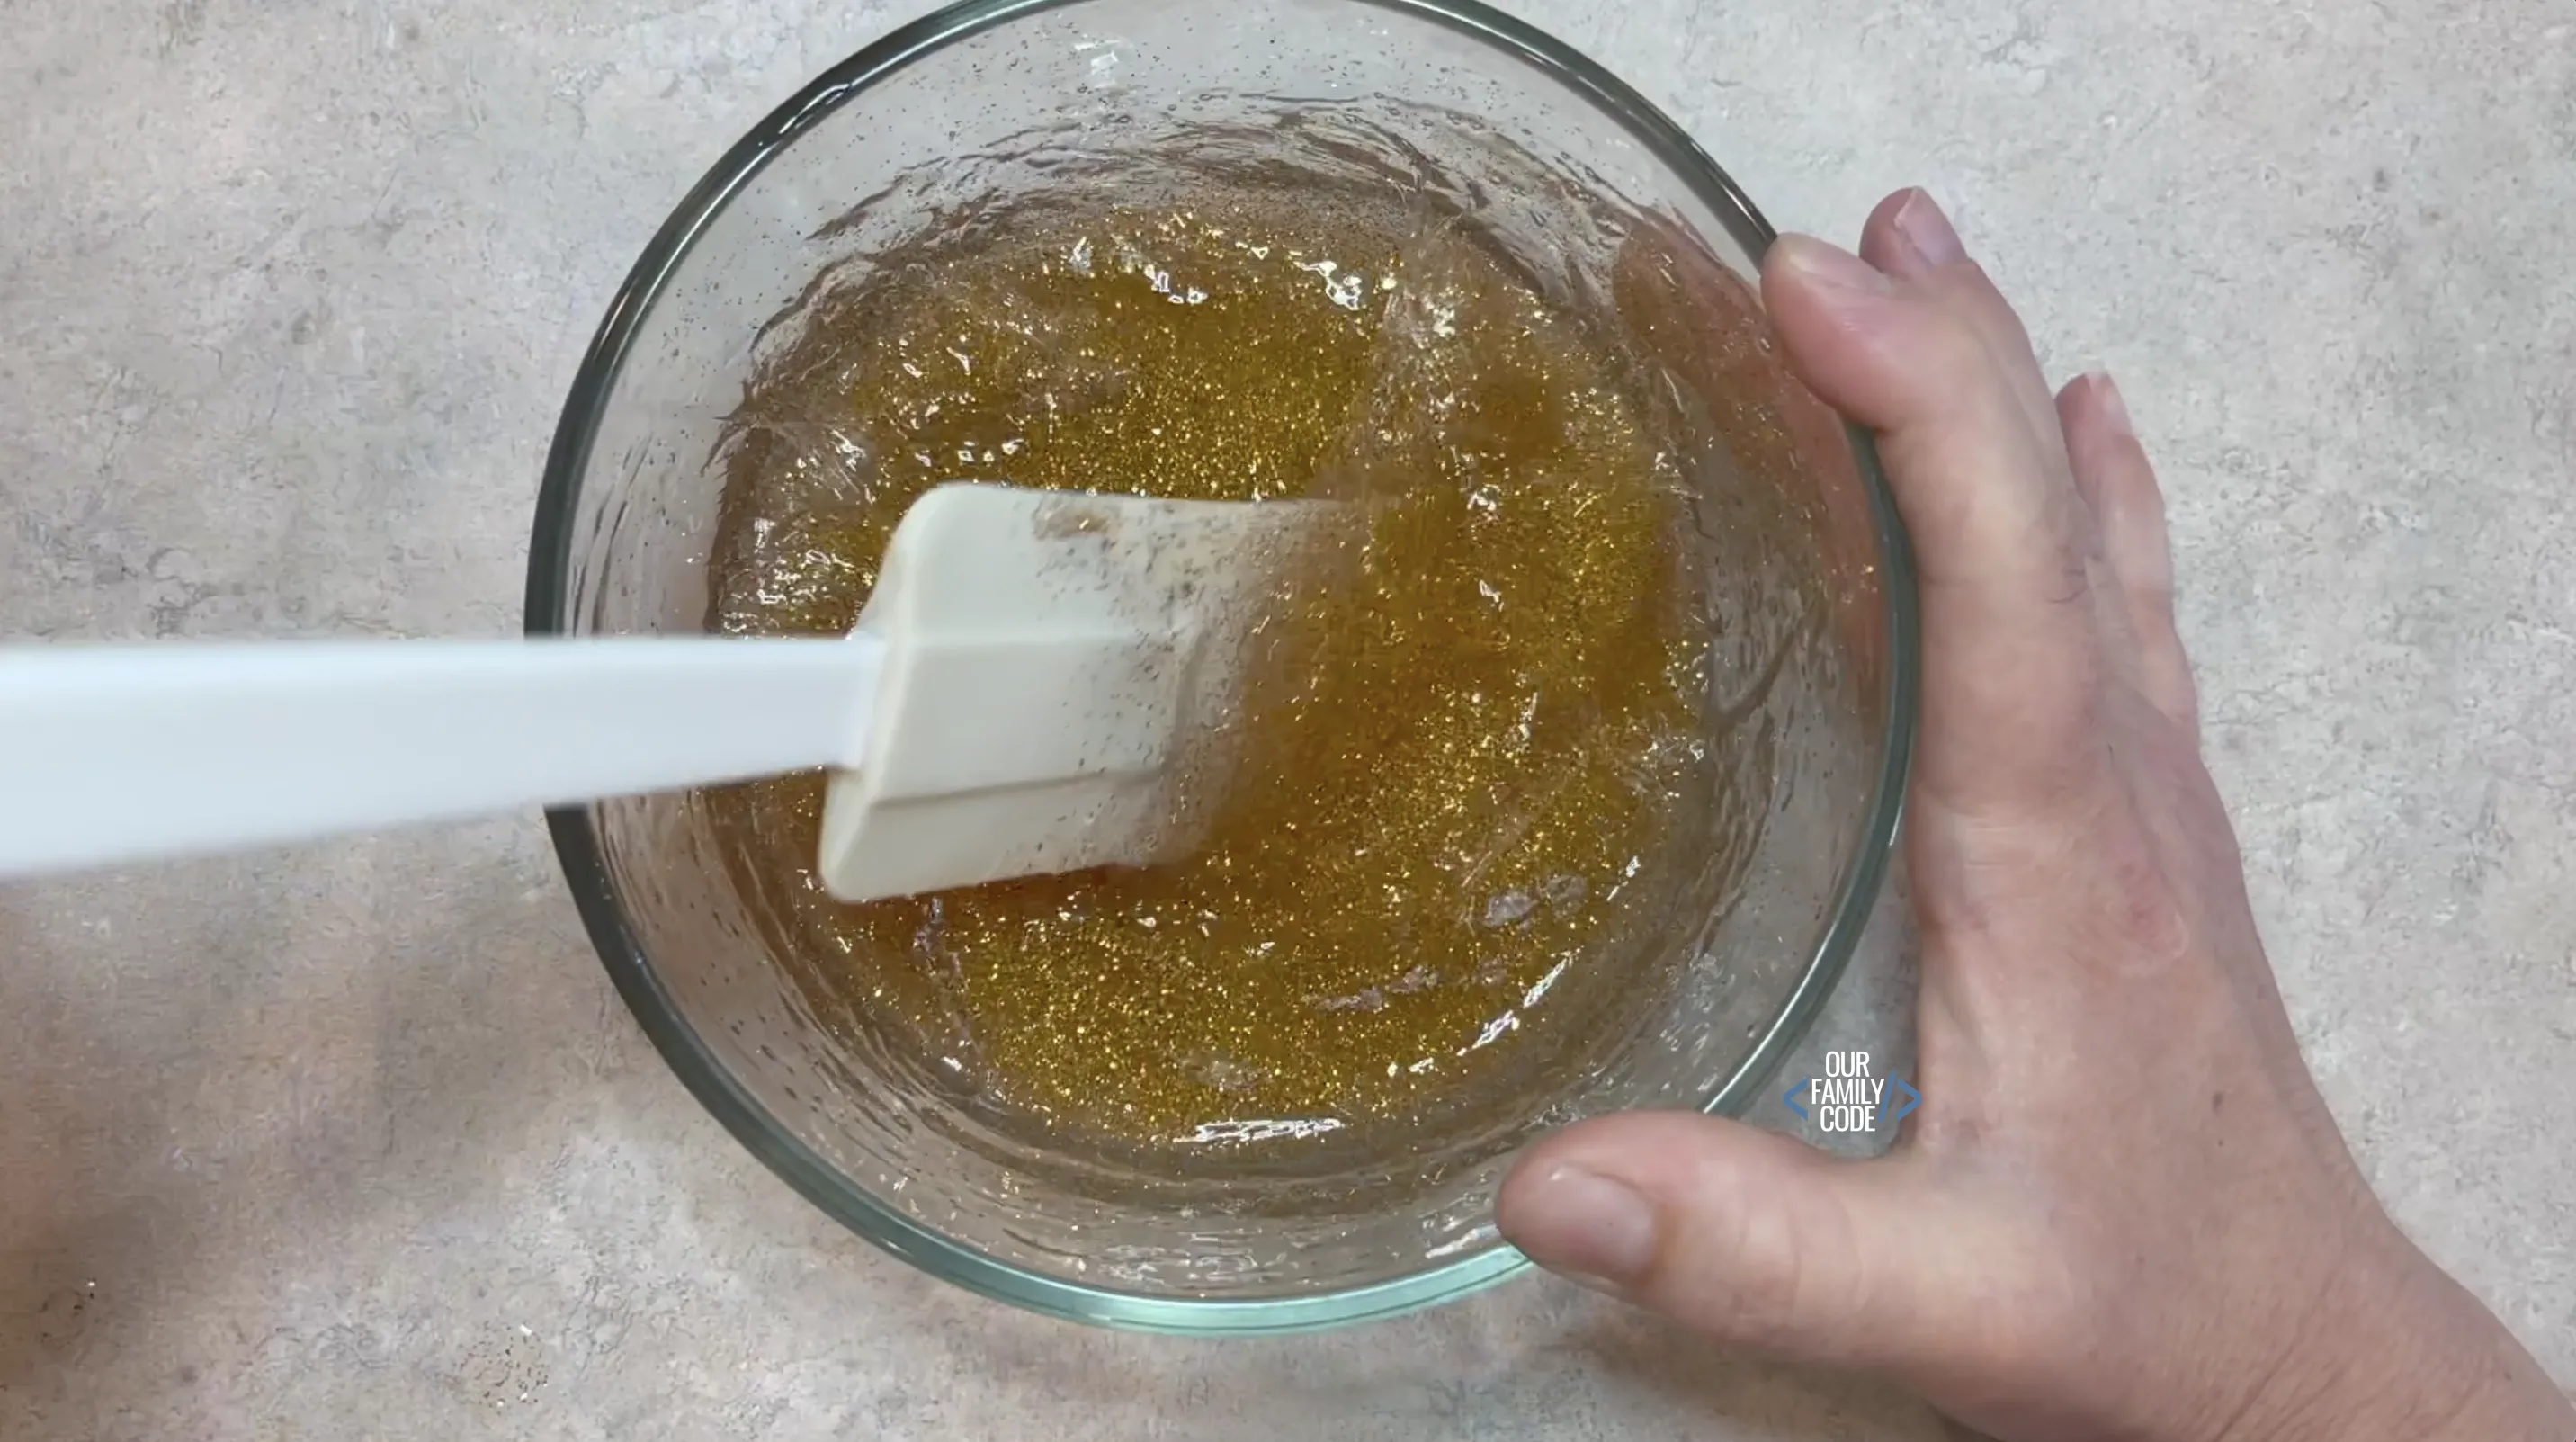 A picture of a saline slime recipe step add saline and stir until slime pulls away from sides of bowl.